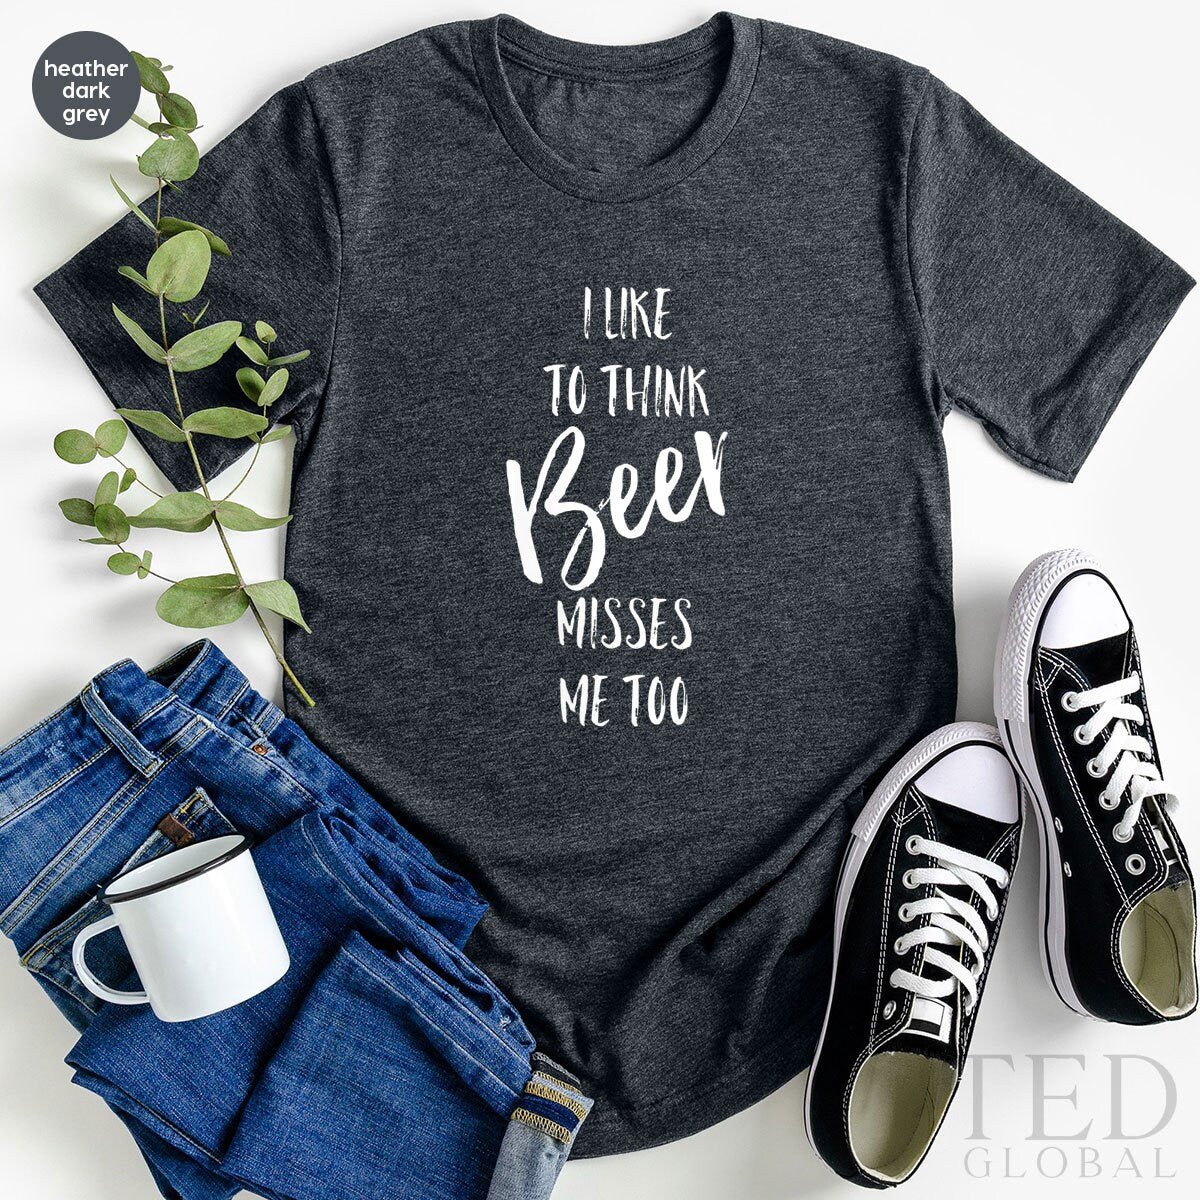 Drinker T-Shirt, I Like To Think Beer Misses Me Too T Shirt, Alcoholic Tee, Beer Lover Shirts, Drinking Party Shirt, Gift For Drinker - Fastdeliverytees.com